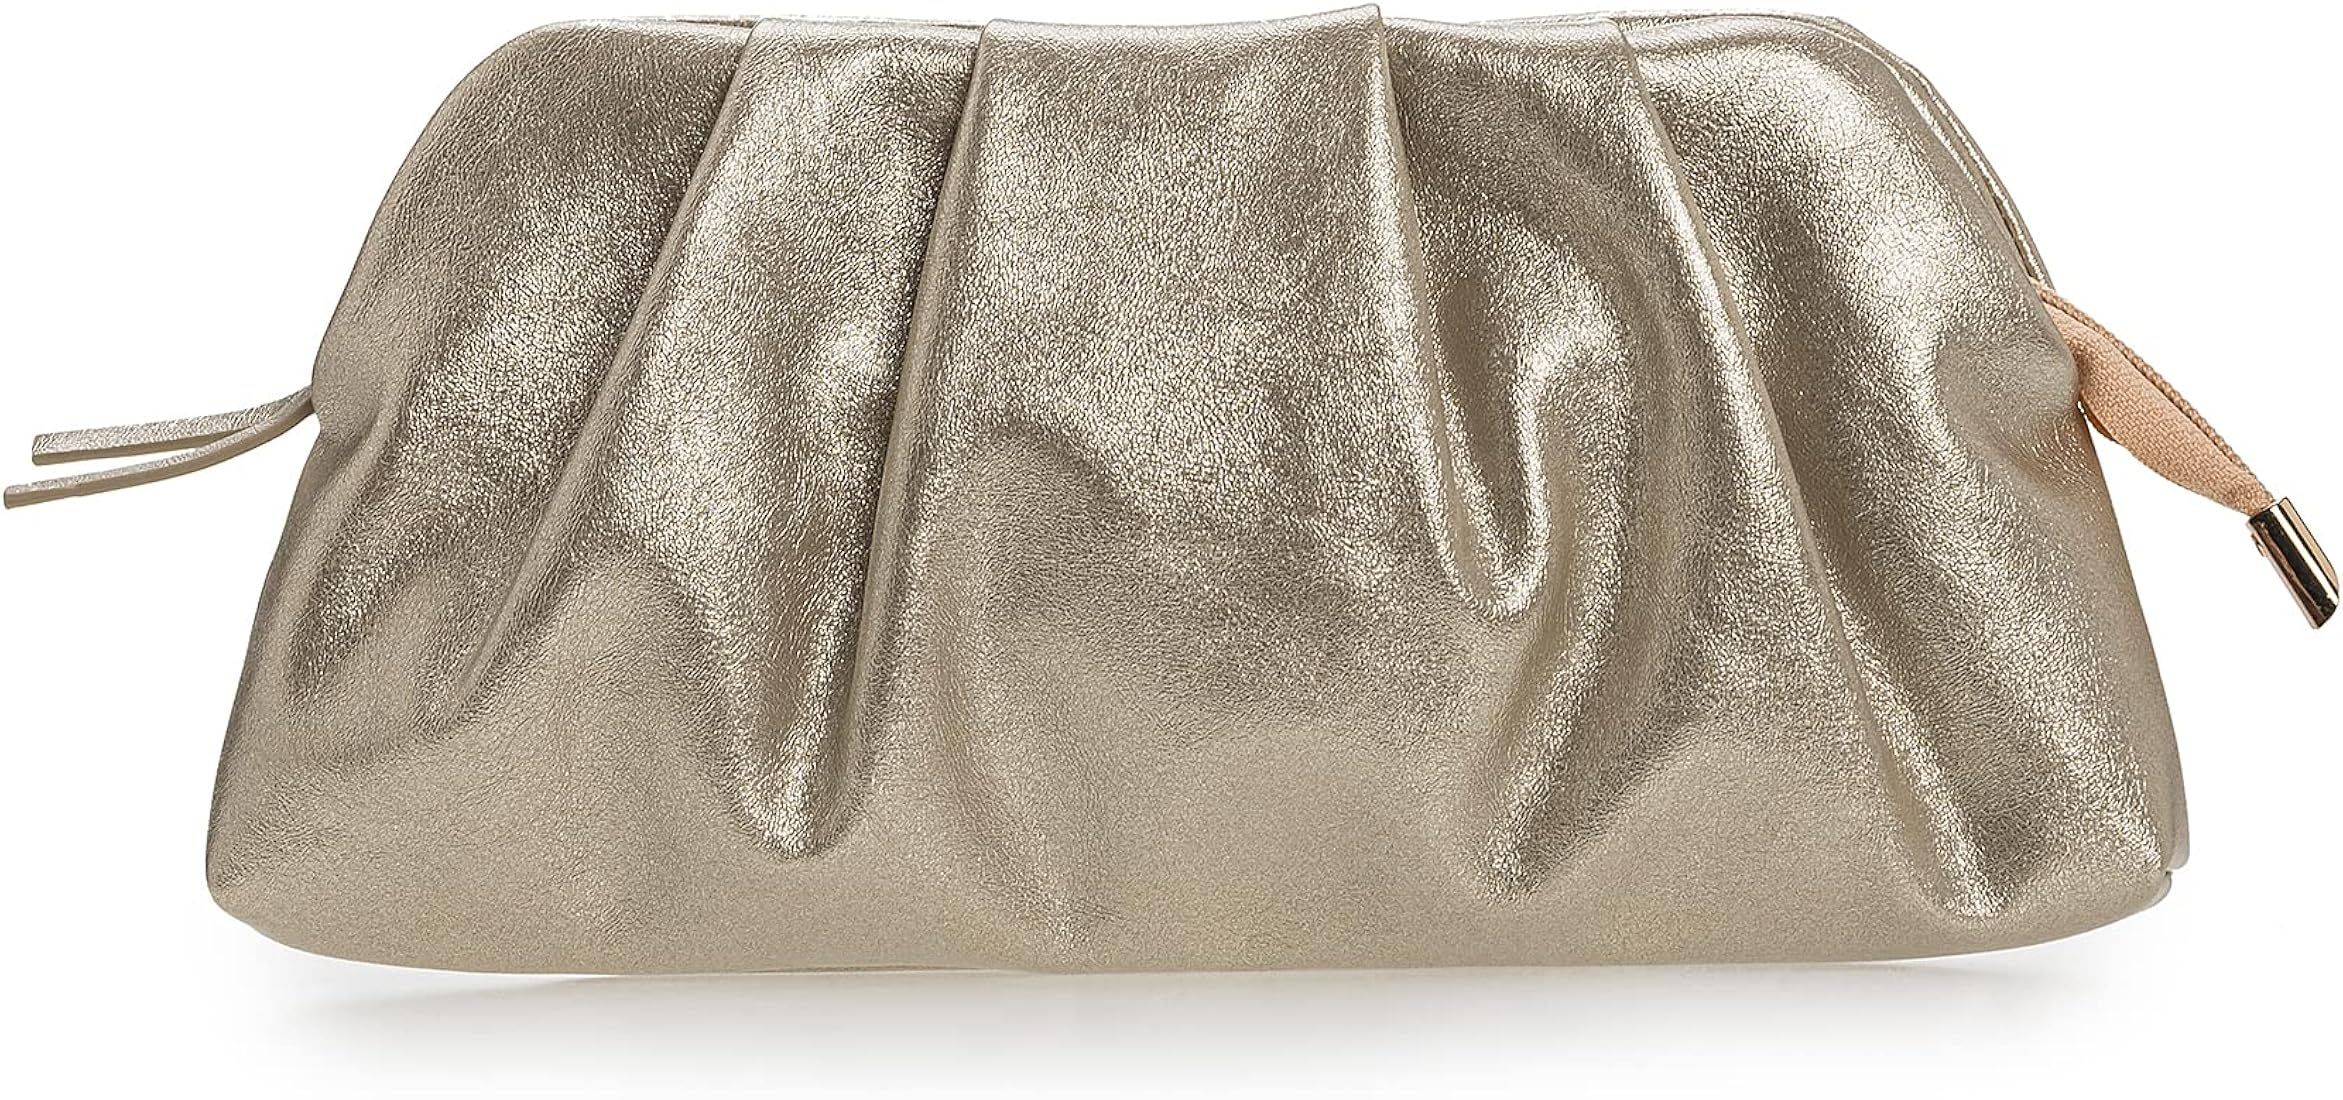 Charming Tailor Chic Soft Vegan Leather Clutch Bag Dressy Pleated PU Evening Purse for Women | Amazon (US)